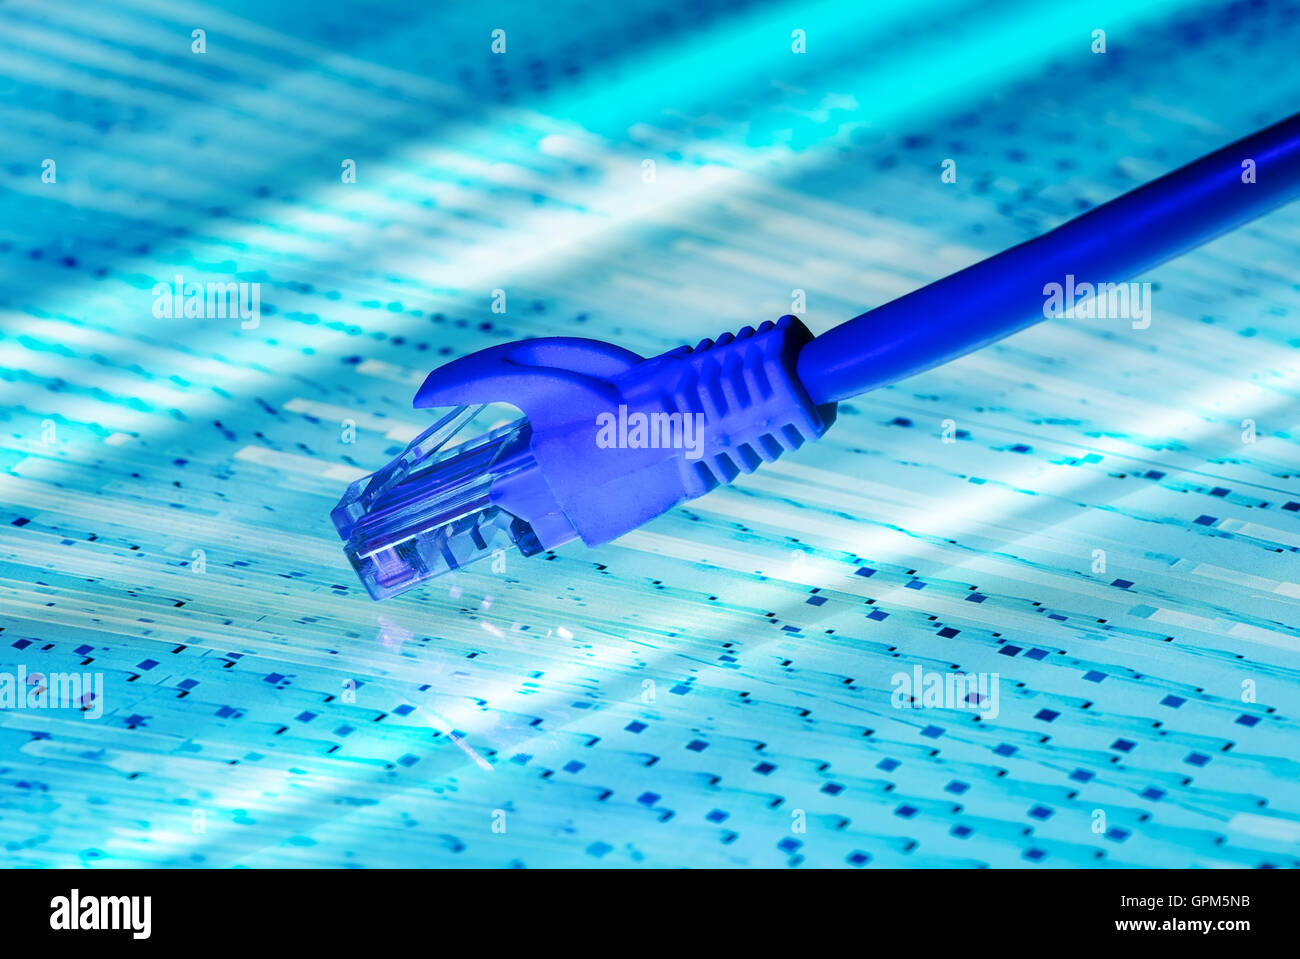 network cable with high tech technology color background Stock Photo